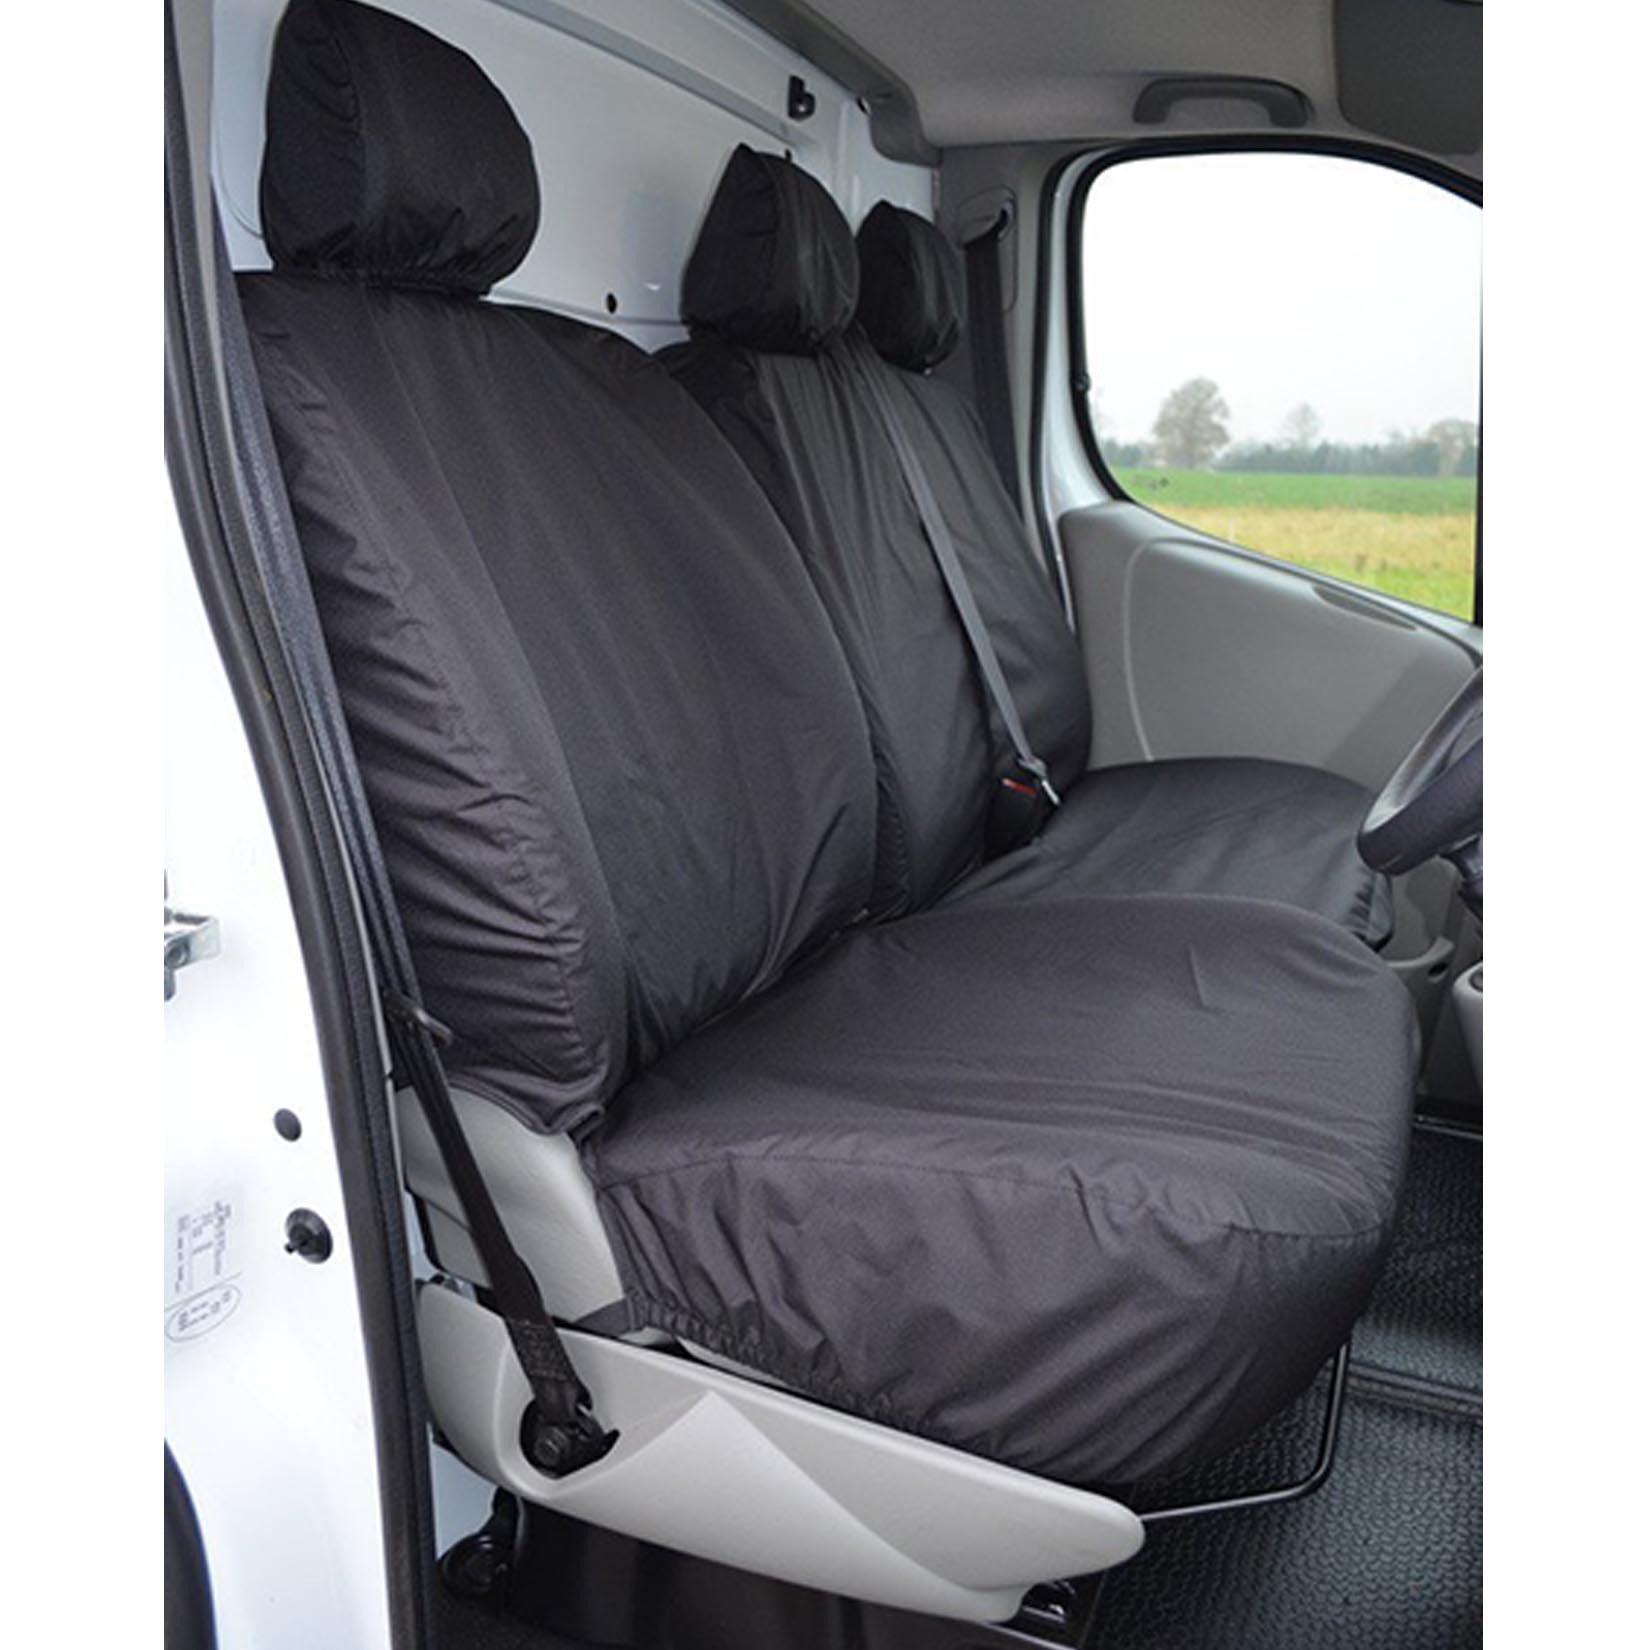 NISSAN PRIMASTAR 2006-2014 DRIVER AND FRONT DOUBLE PASSENGER (NO ARMREST) SEAT COVERS - BLACK - Storm Xccessories2